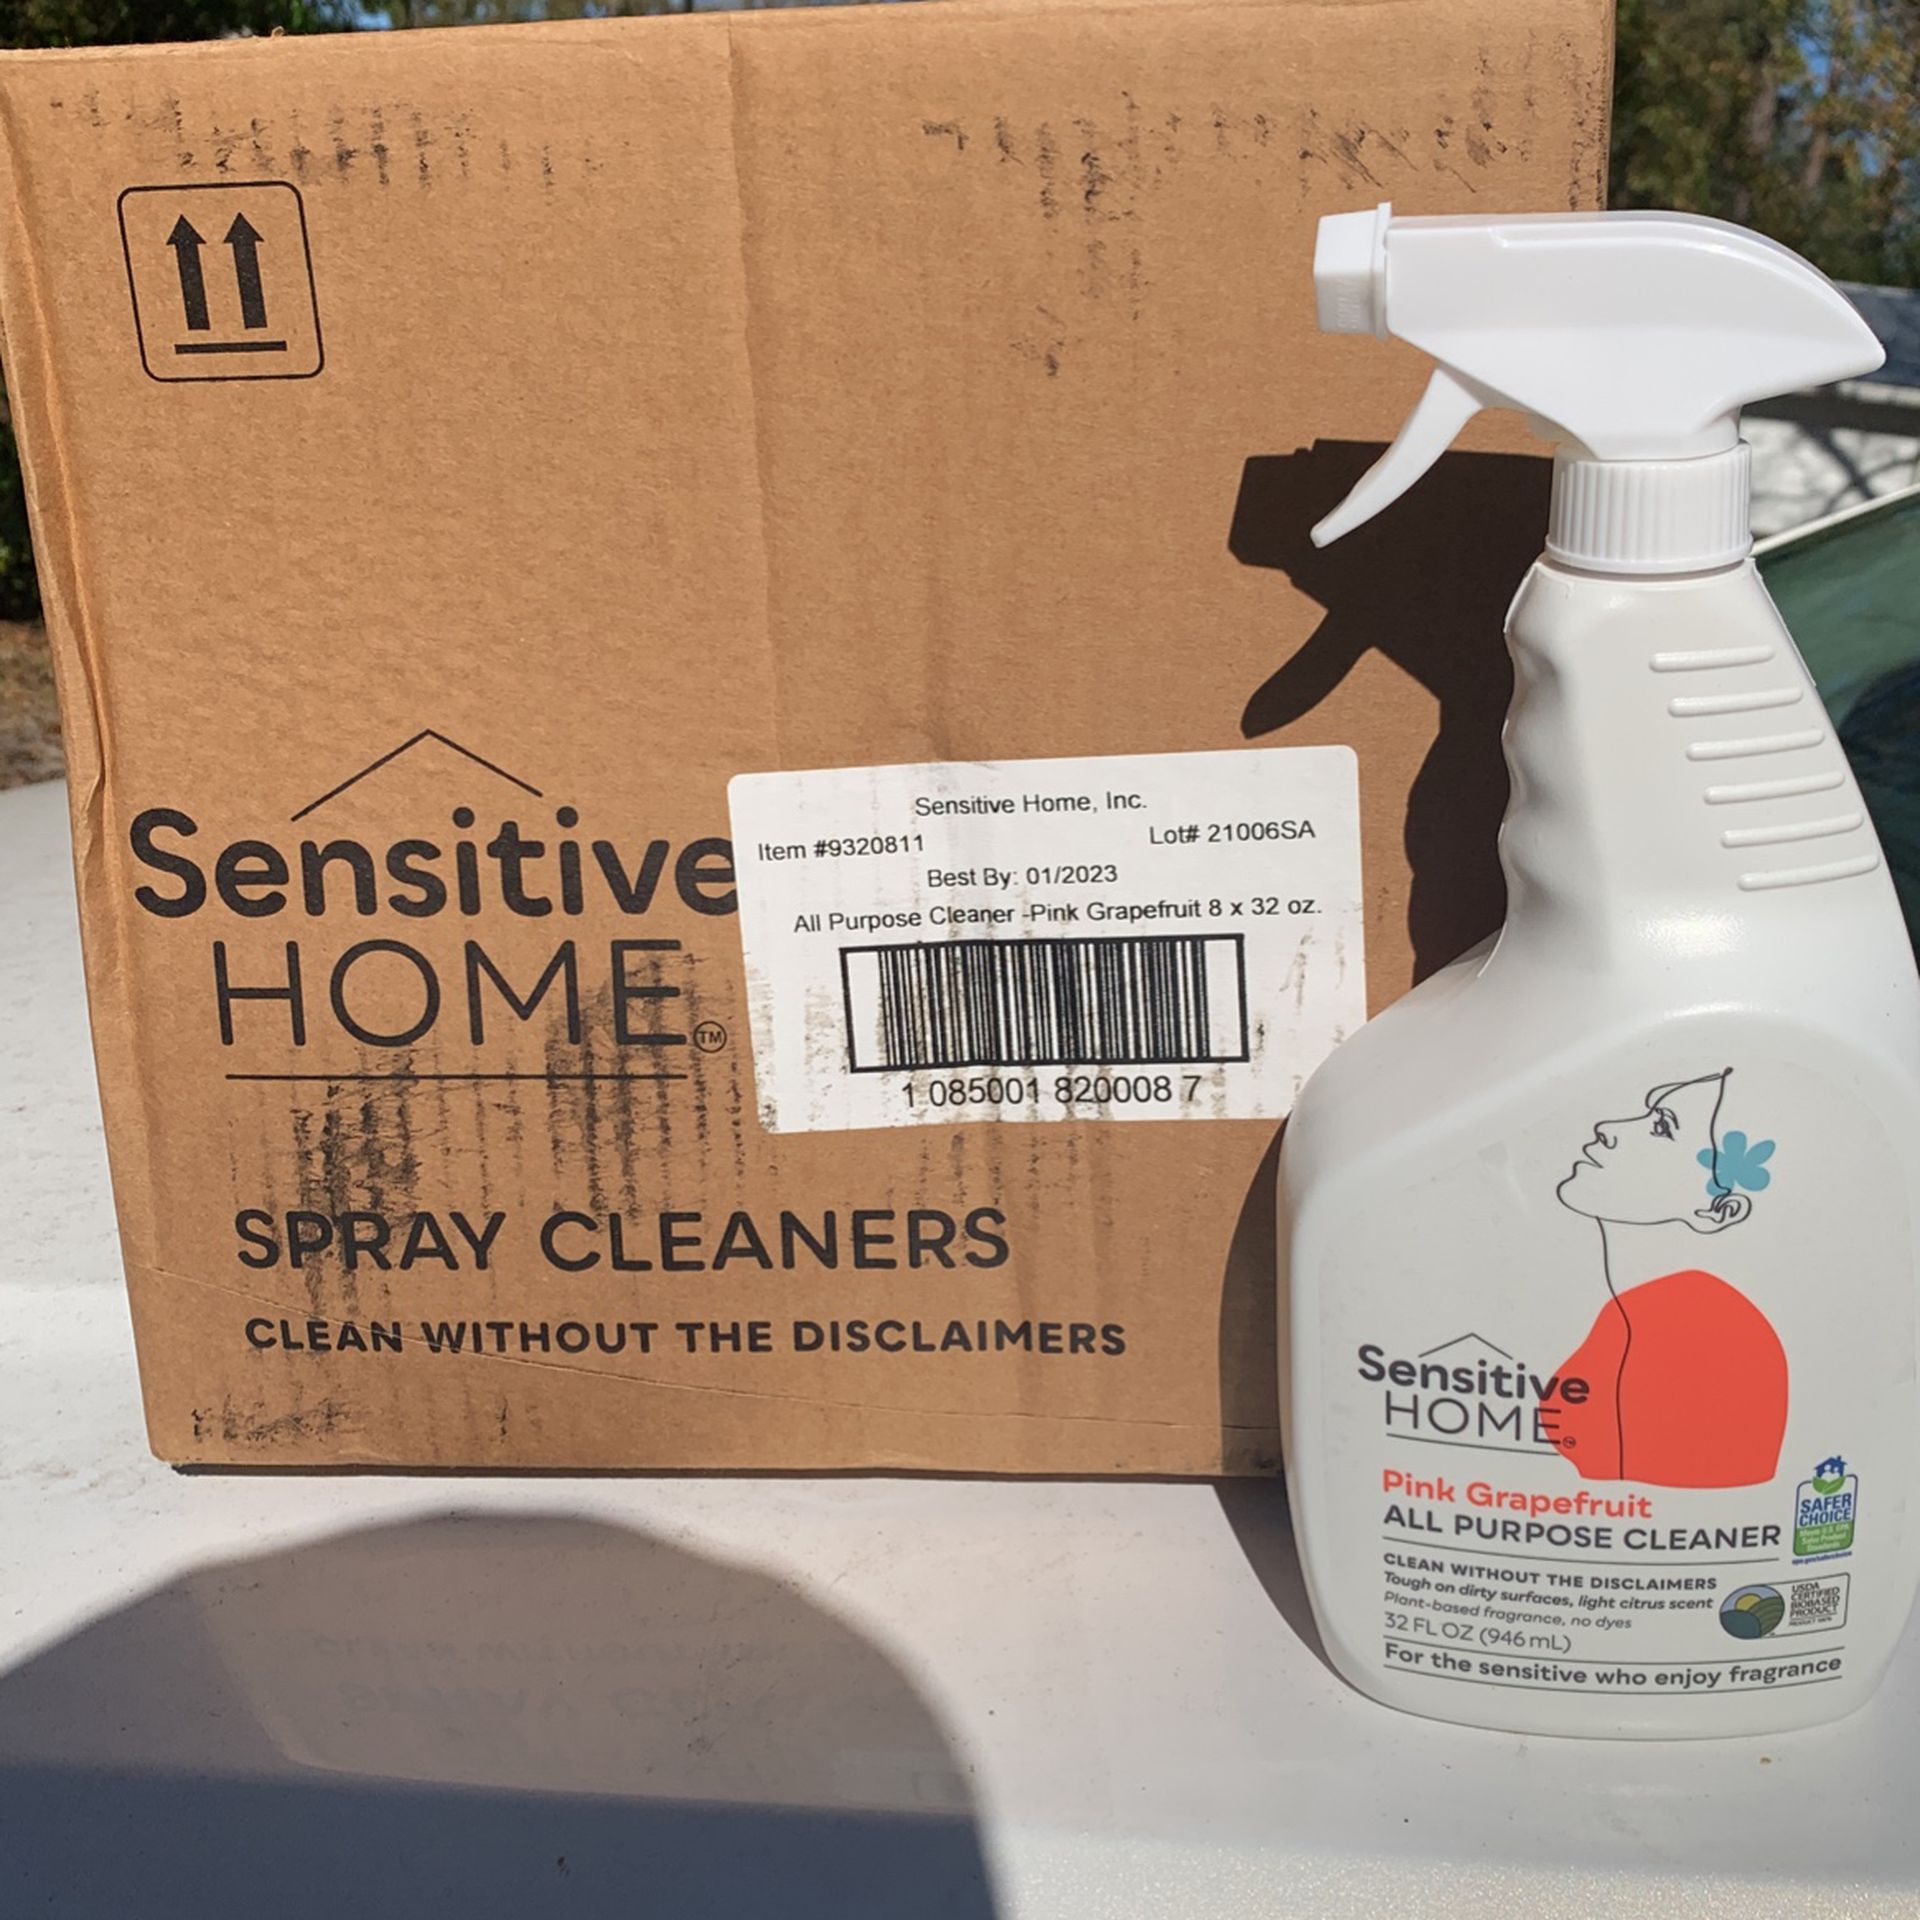 Sensitive Home Spray Cleaners